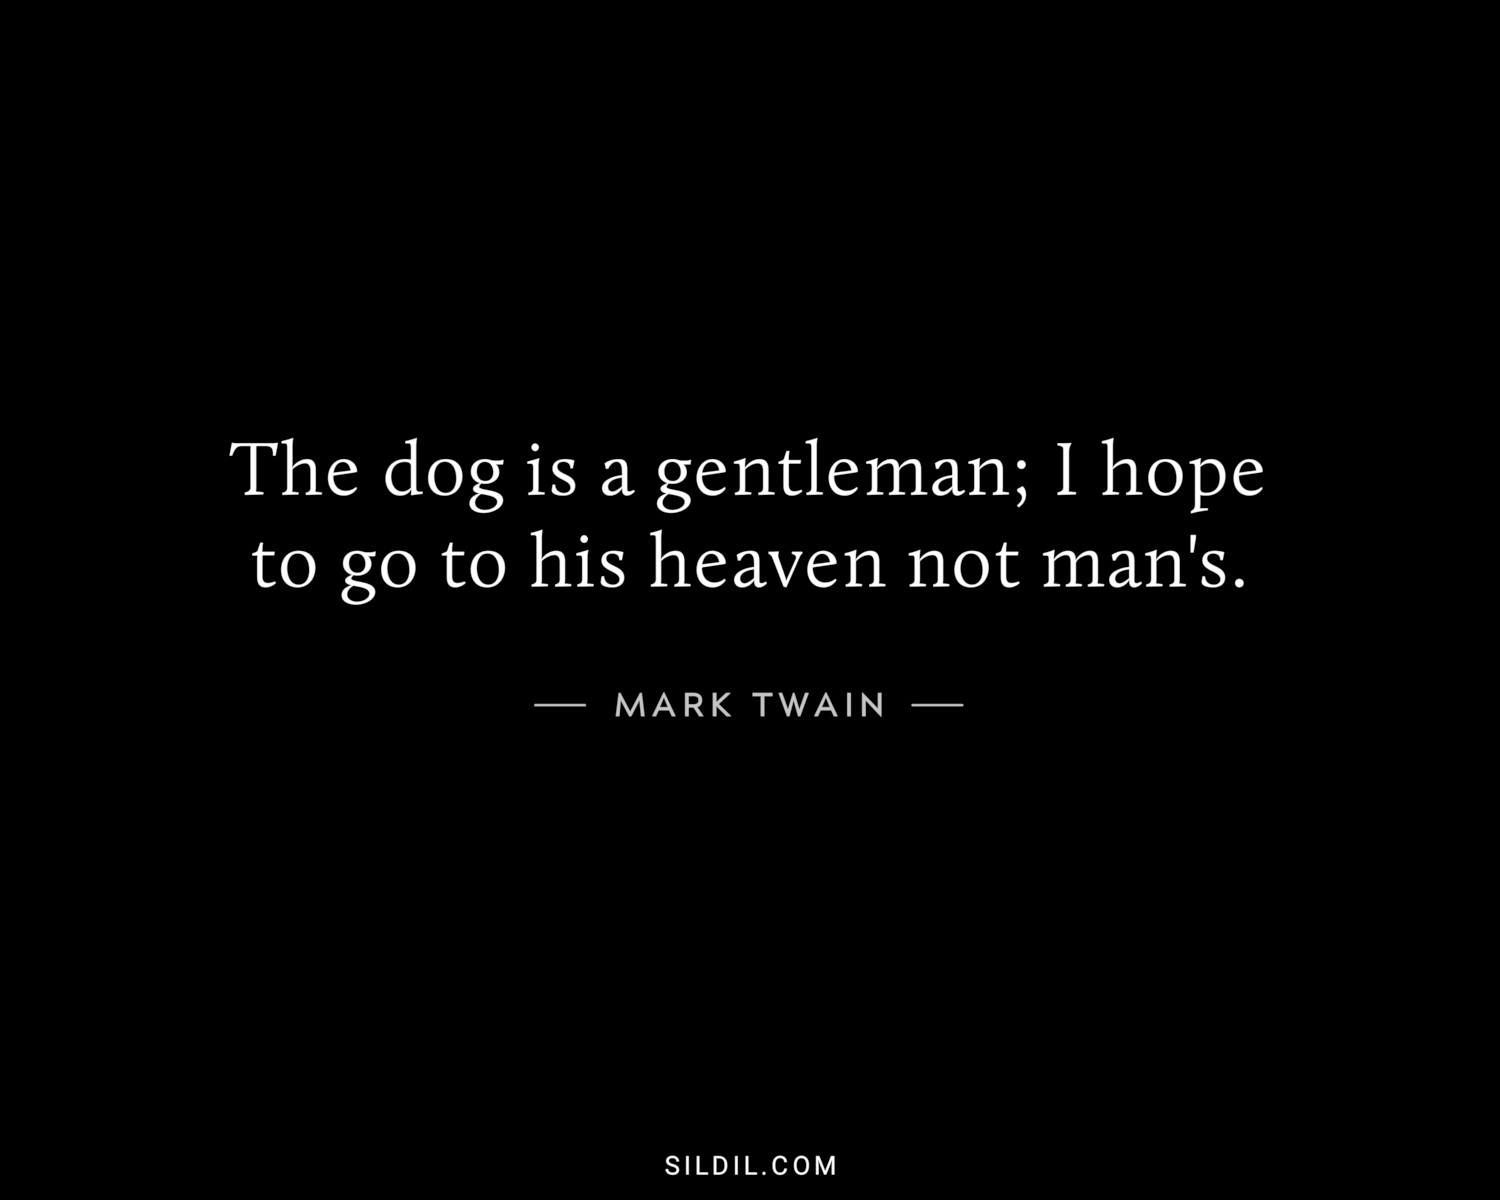 The dog is a gentleman; I hope to go to his heaven not man's.